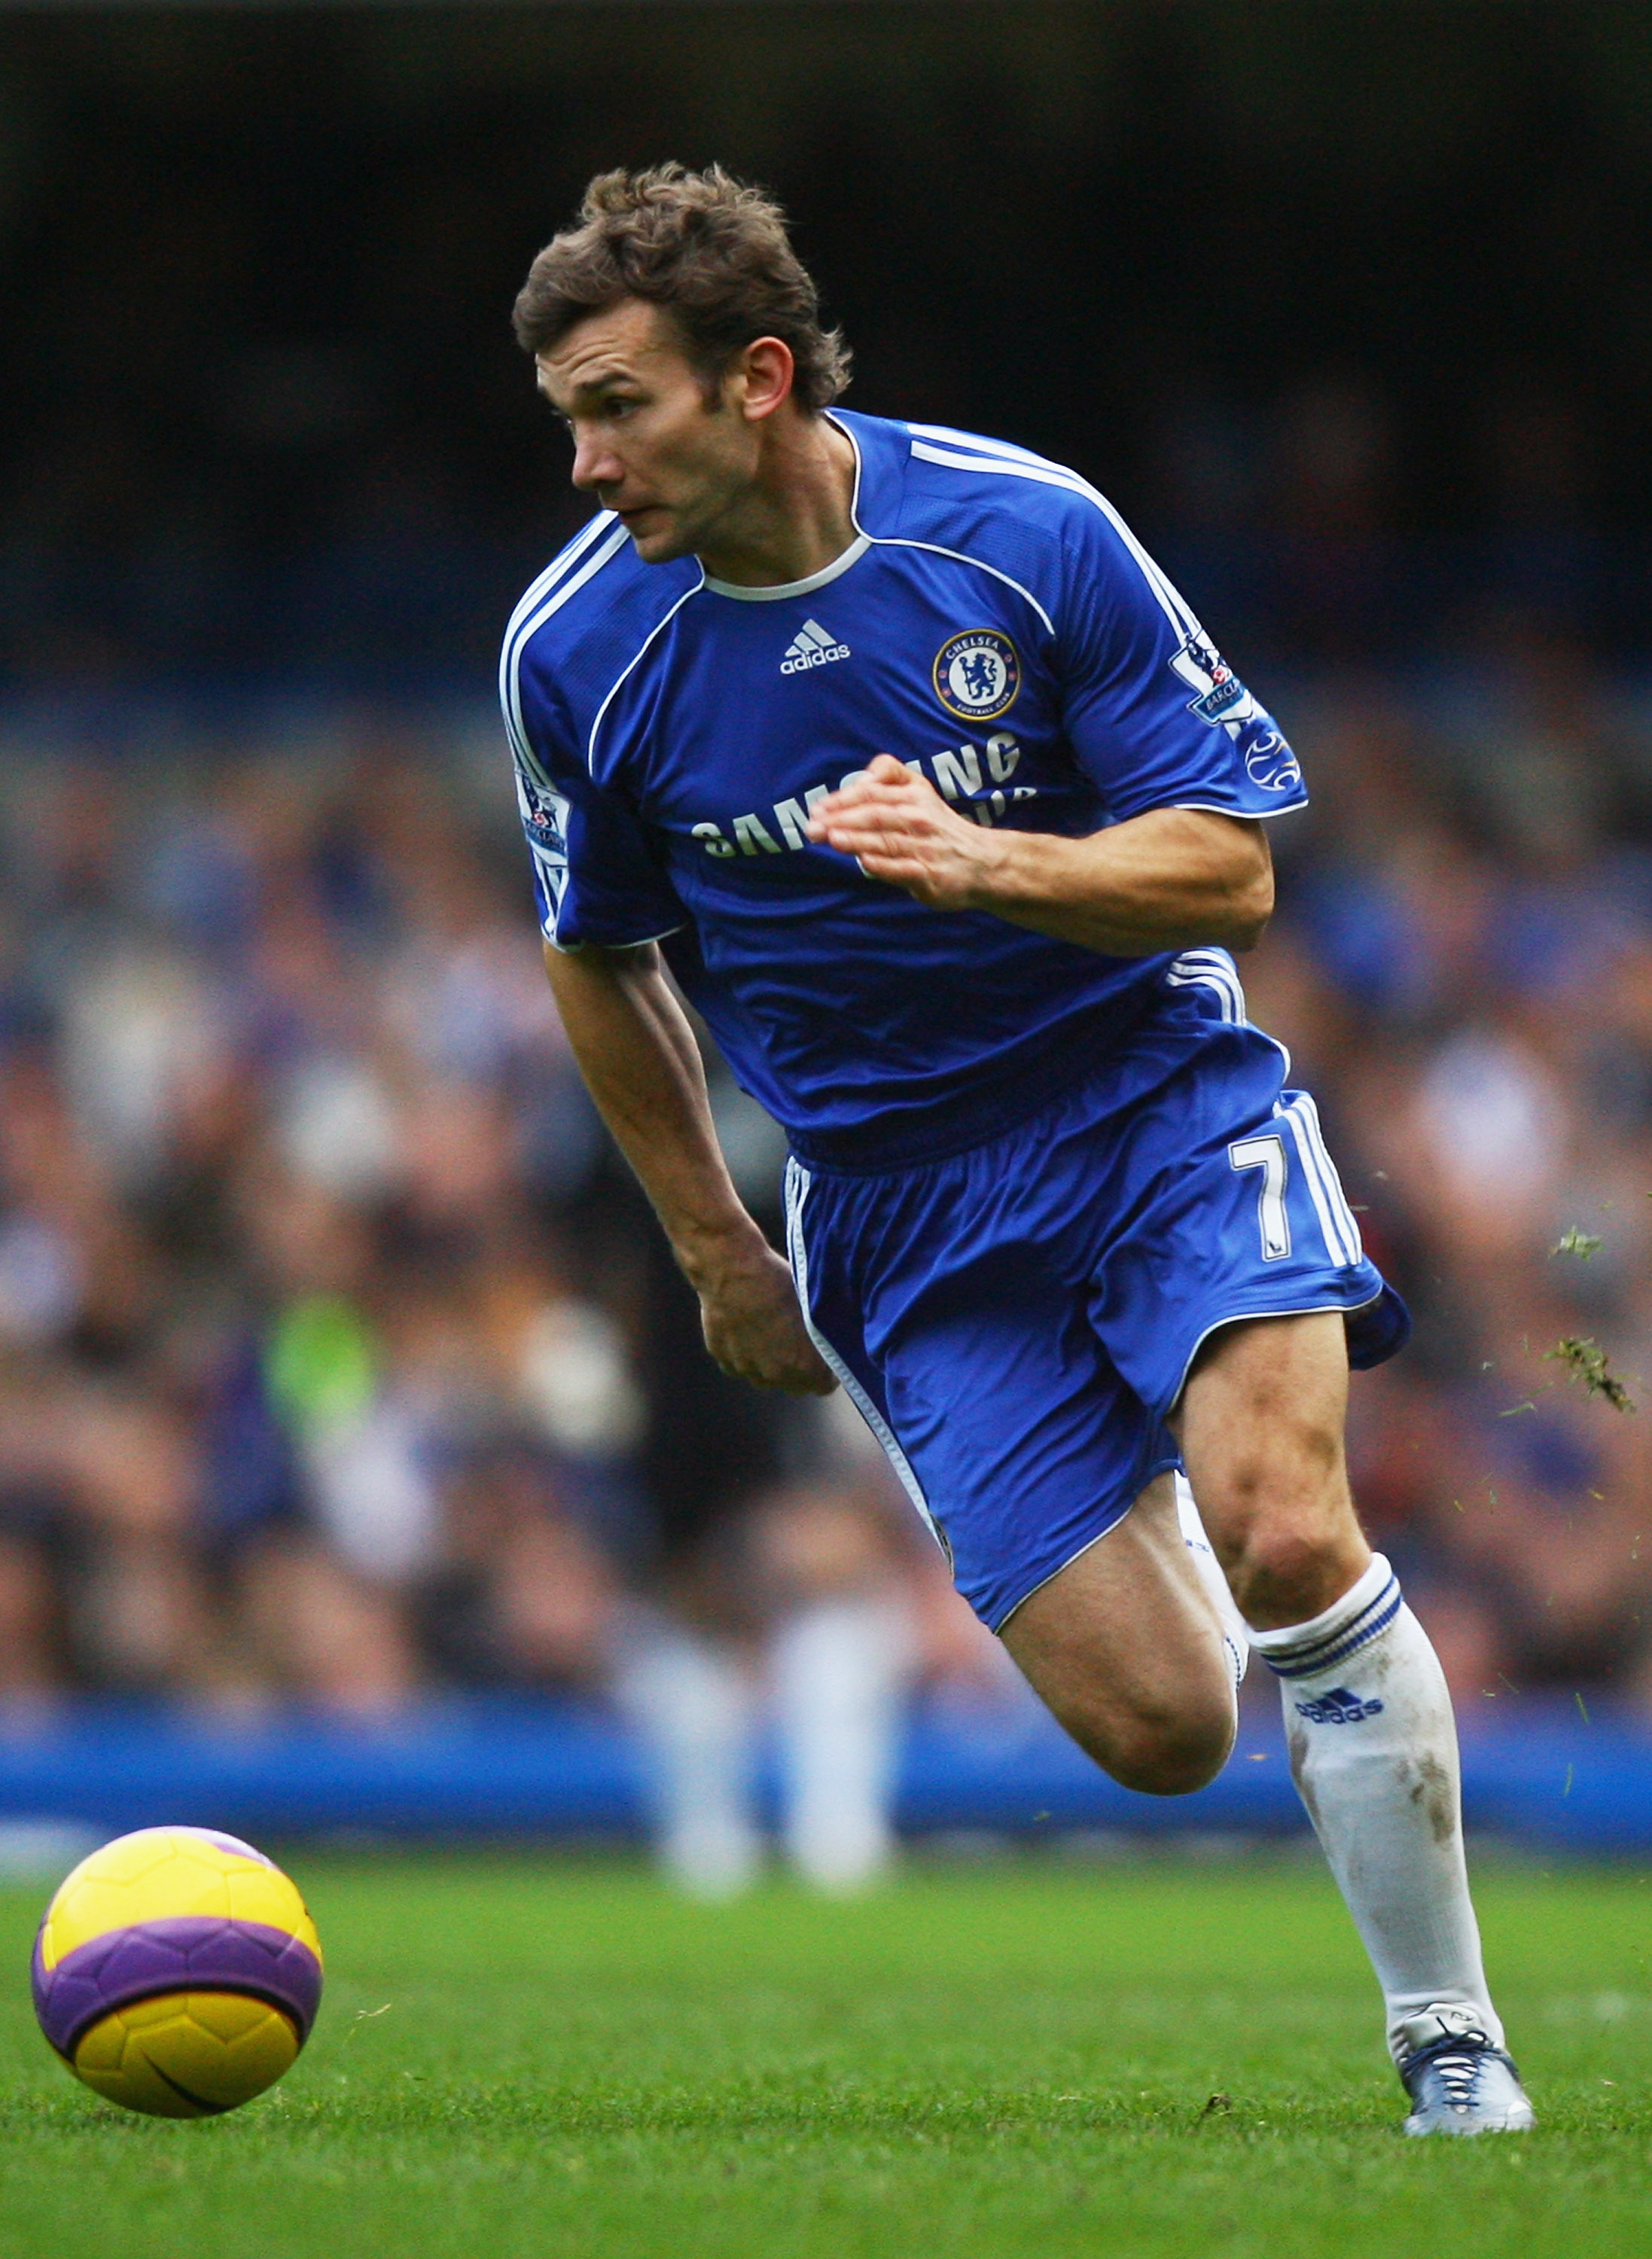 LONDON - DECEMBER 26:  Andriy Shevchenko of Chelsea runs with the ball during the Barclays Premier League match between Chelsea and Aston Villa at Stamford Bridge on December 26, 2007 in London, England.  (Photo by Ryan Pierse/Getty Images)